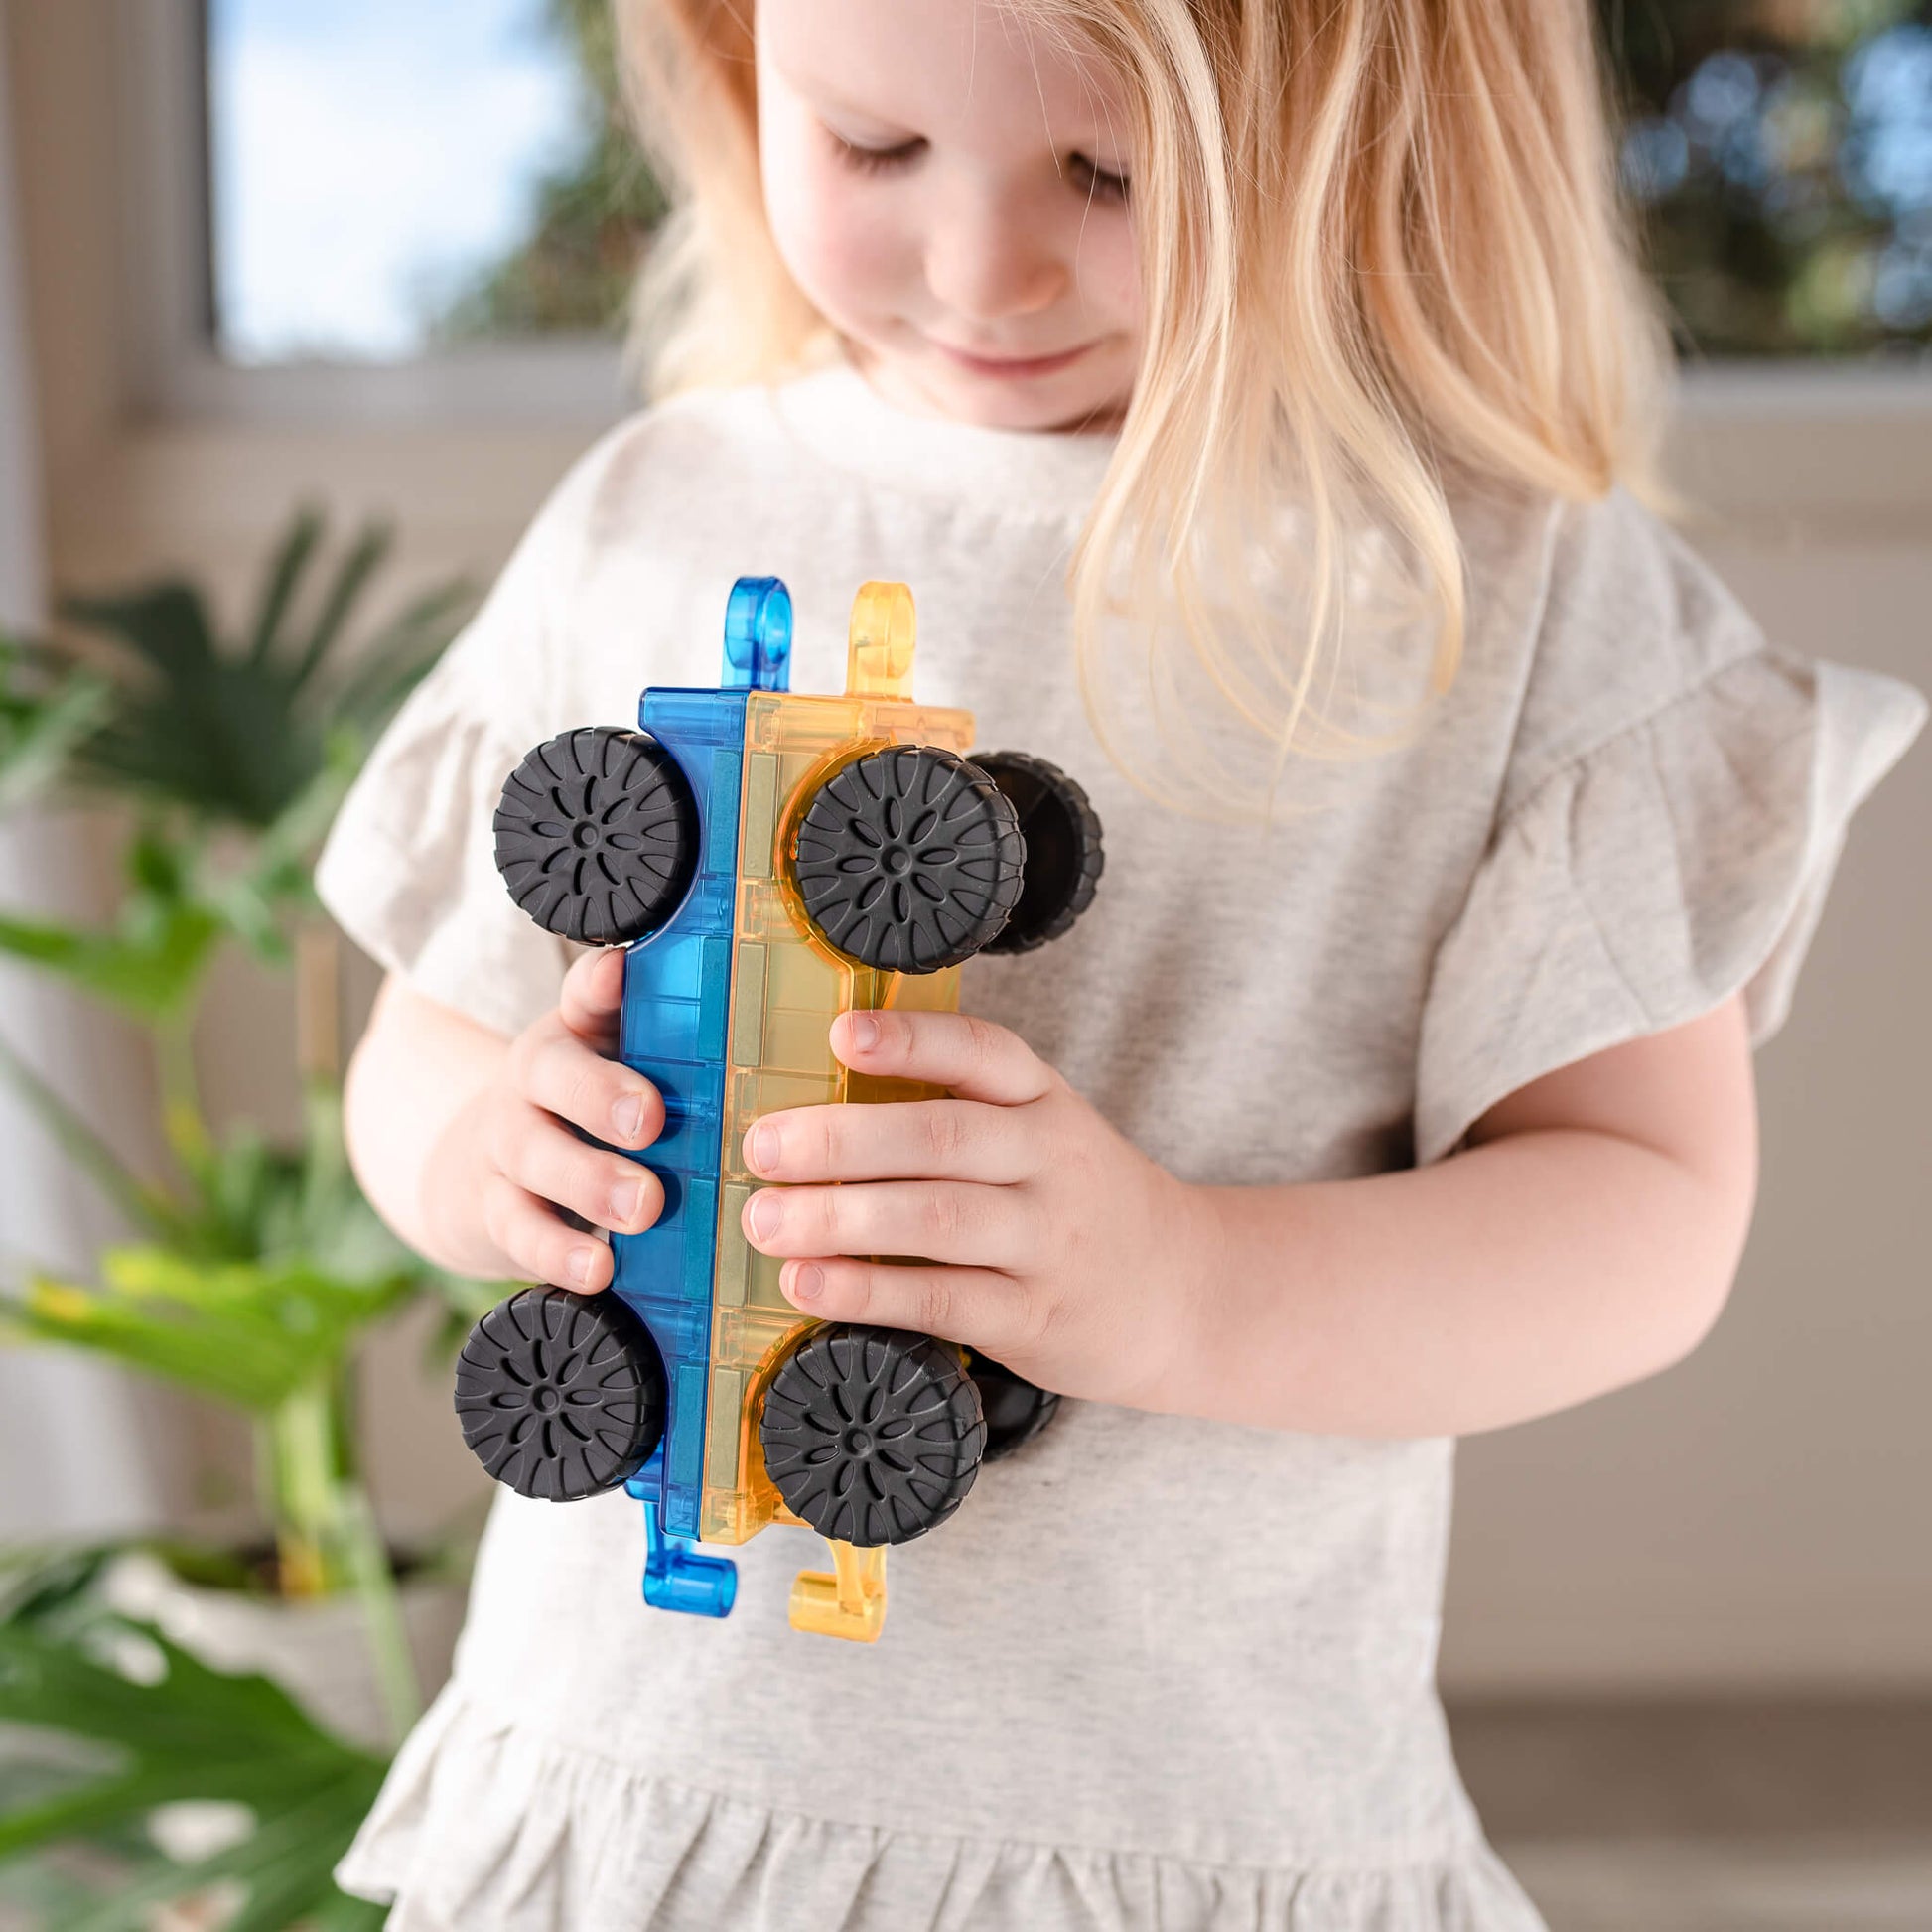 Connetix 2 Piece Car Pack | Magnetic Tiles from Bear & Moo